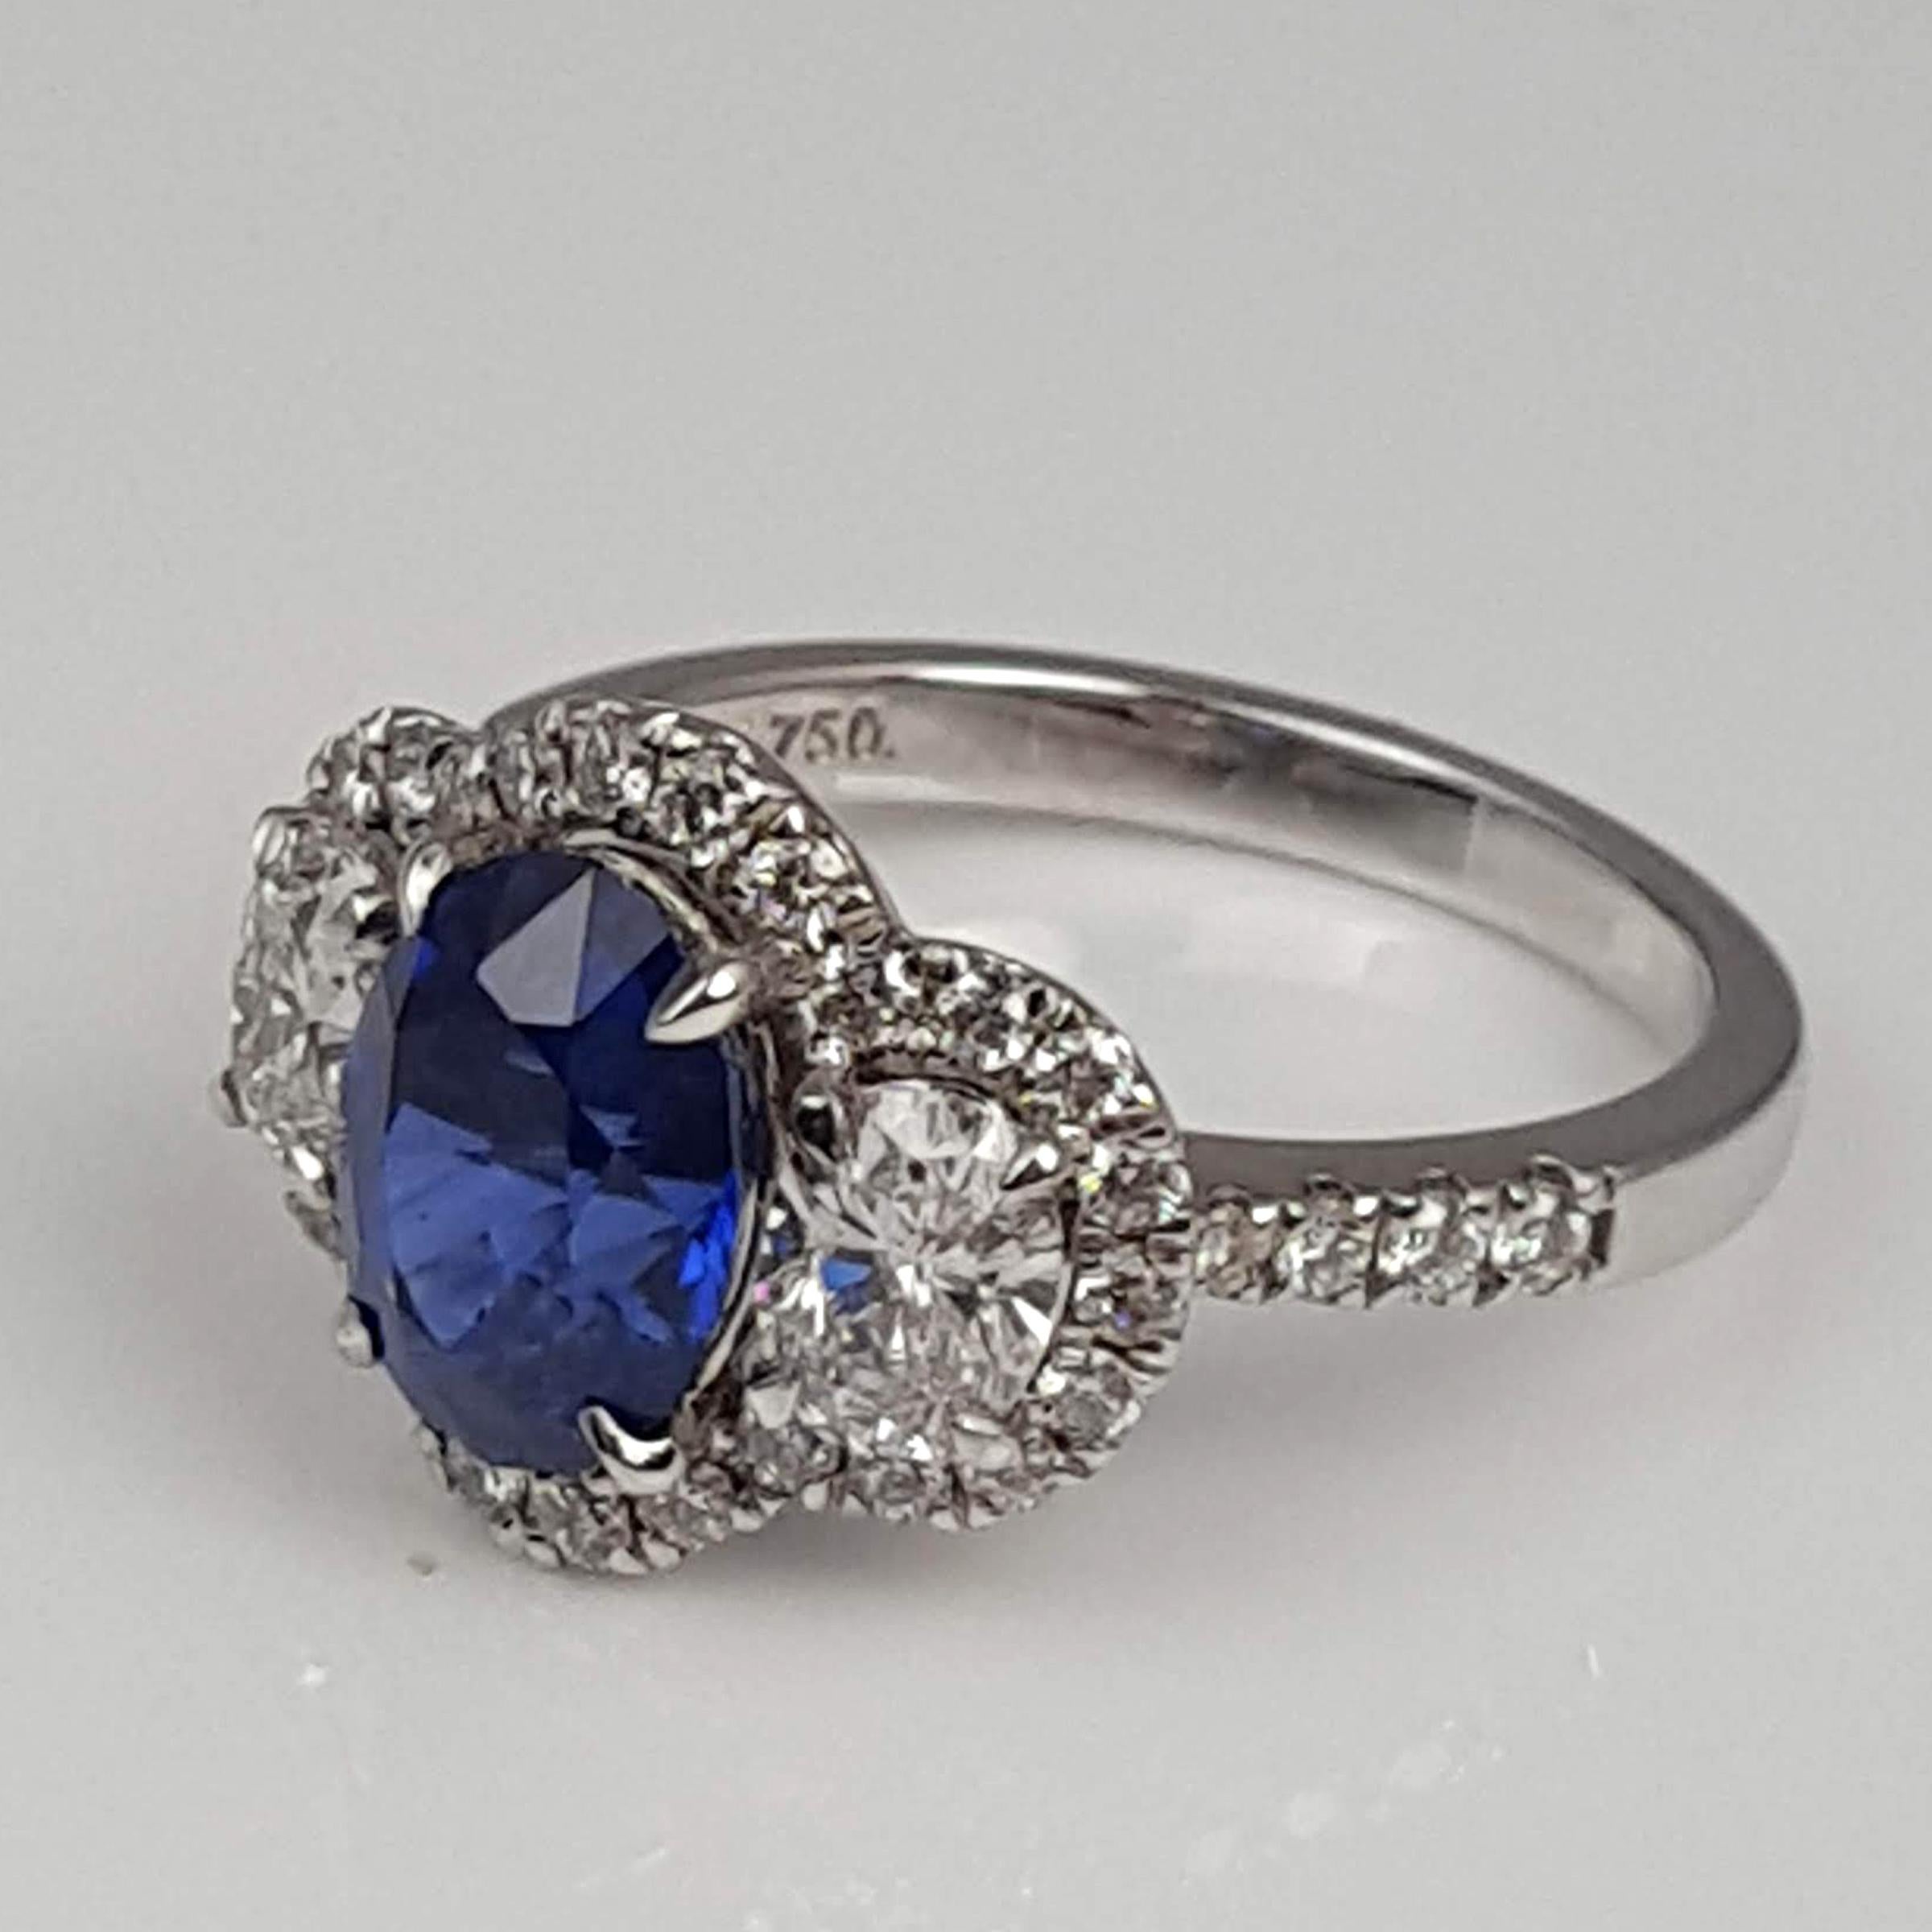 GIA Certified 2.45 Carat Oval Cut Ceylon Sapphire Ring by Diamond Town 1